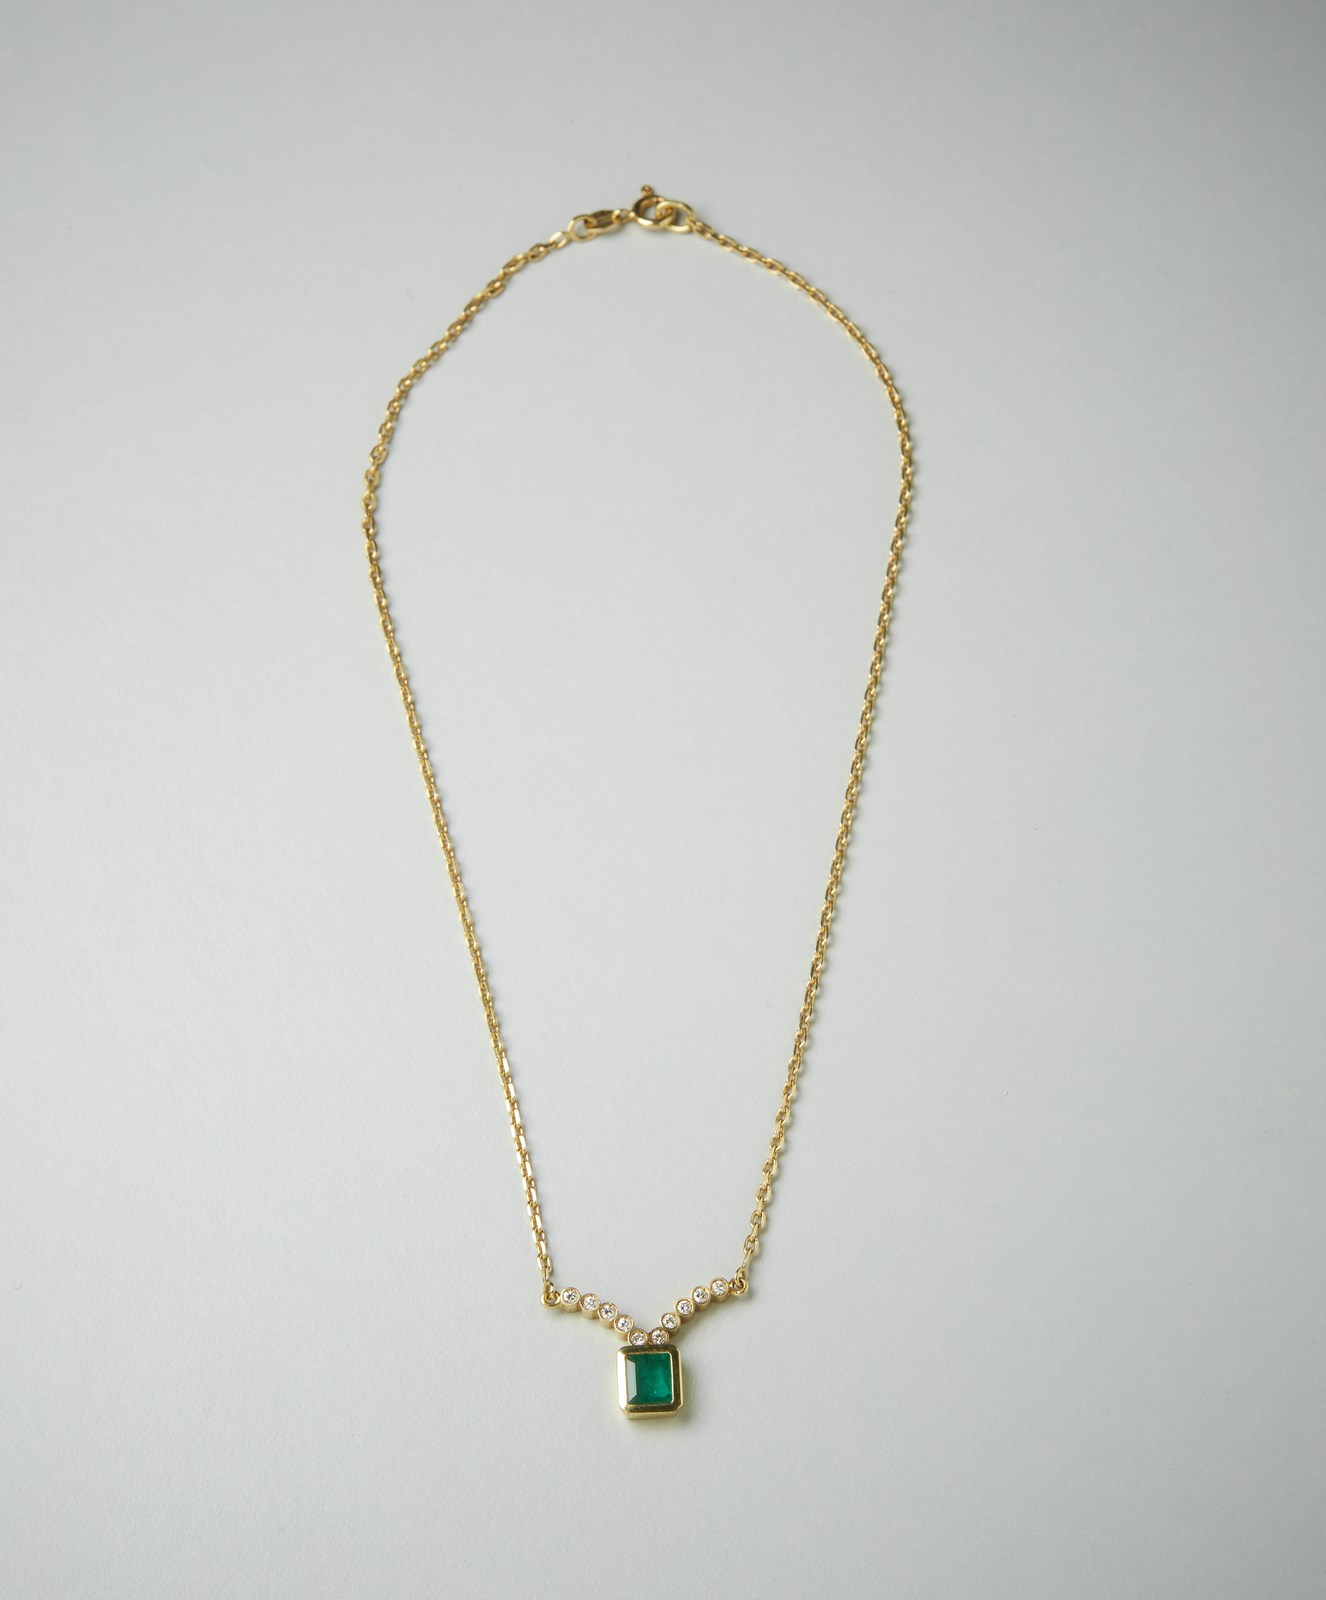 Necklace with pendant in yellow gold 750/1000 with emerald cut emerald of 1.00 kt ca. and white diamonds of 0.45 ct. ca.  (. )